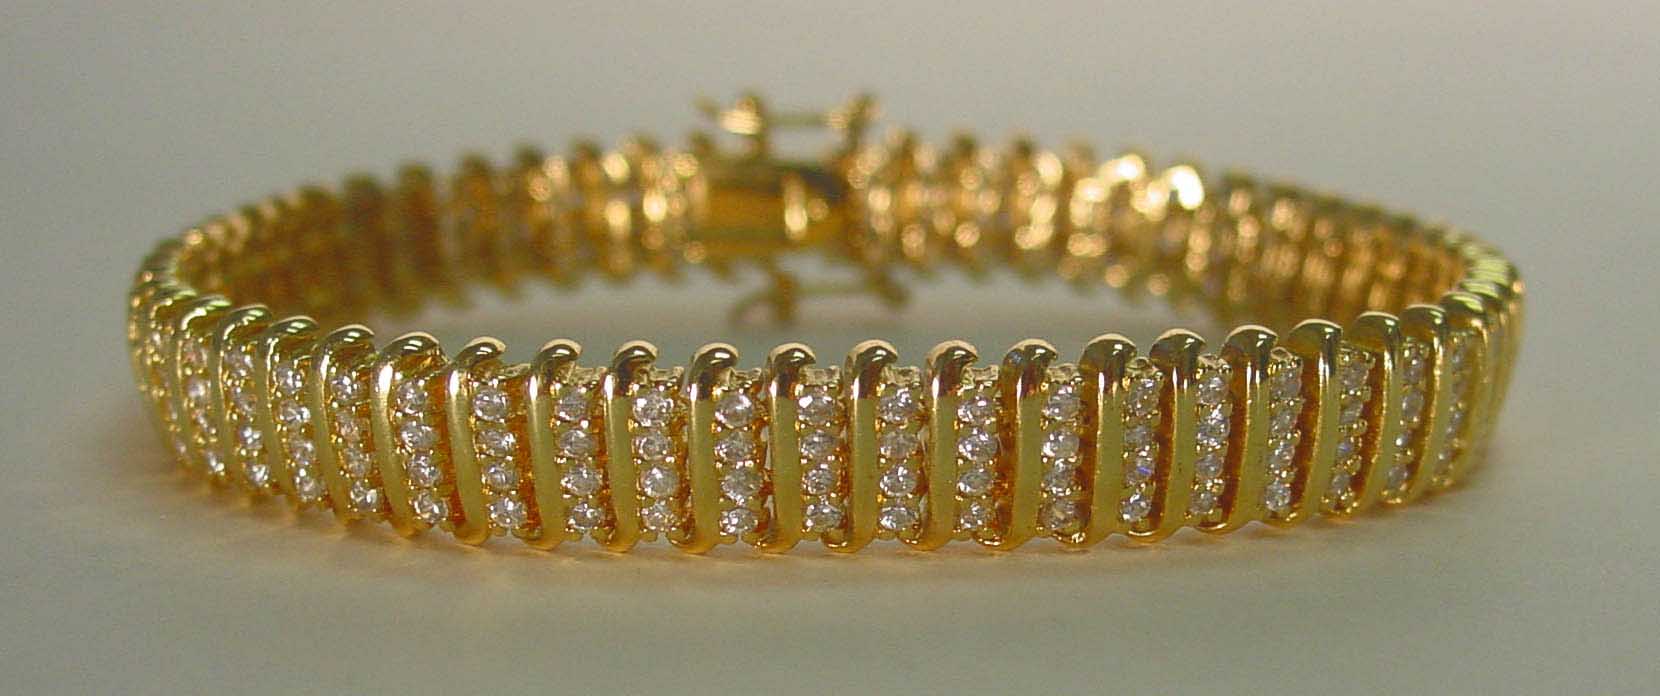 Clear colored CZ 4 row gold bracelet